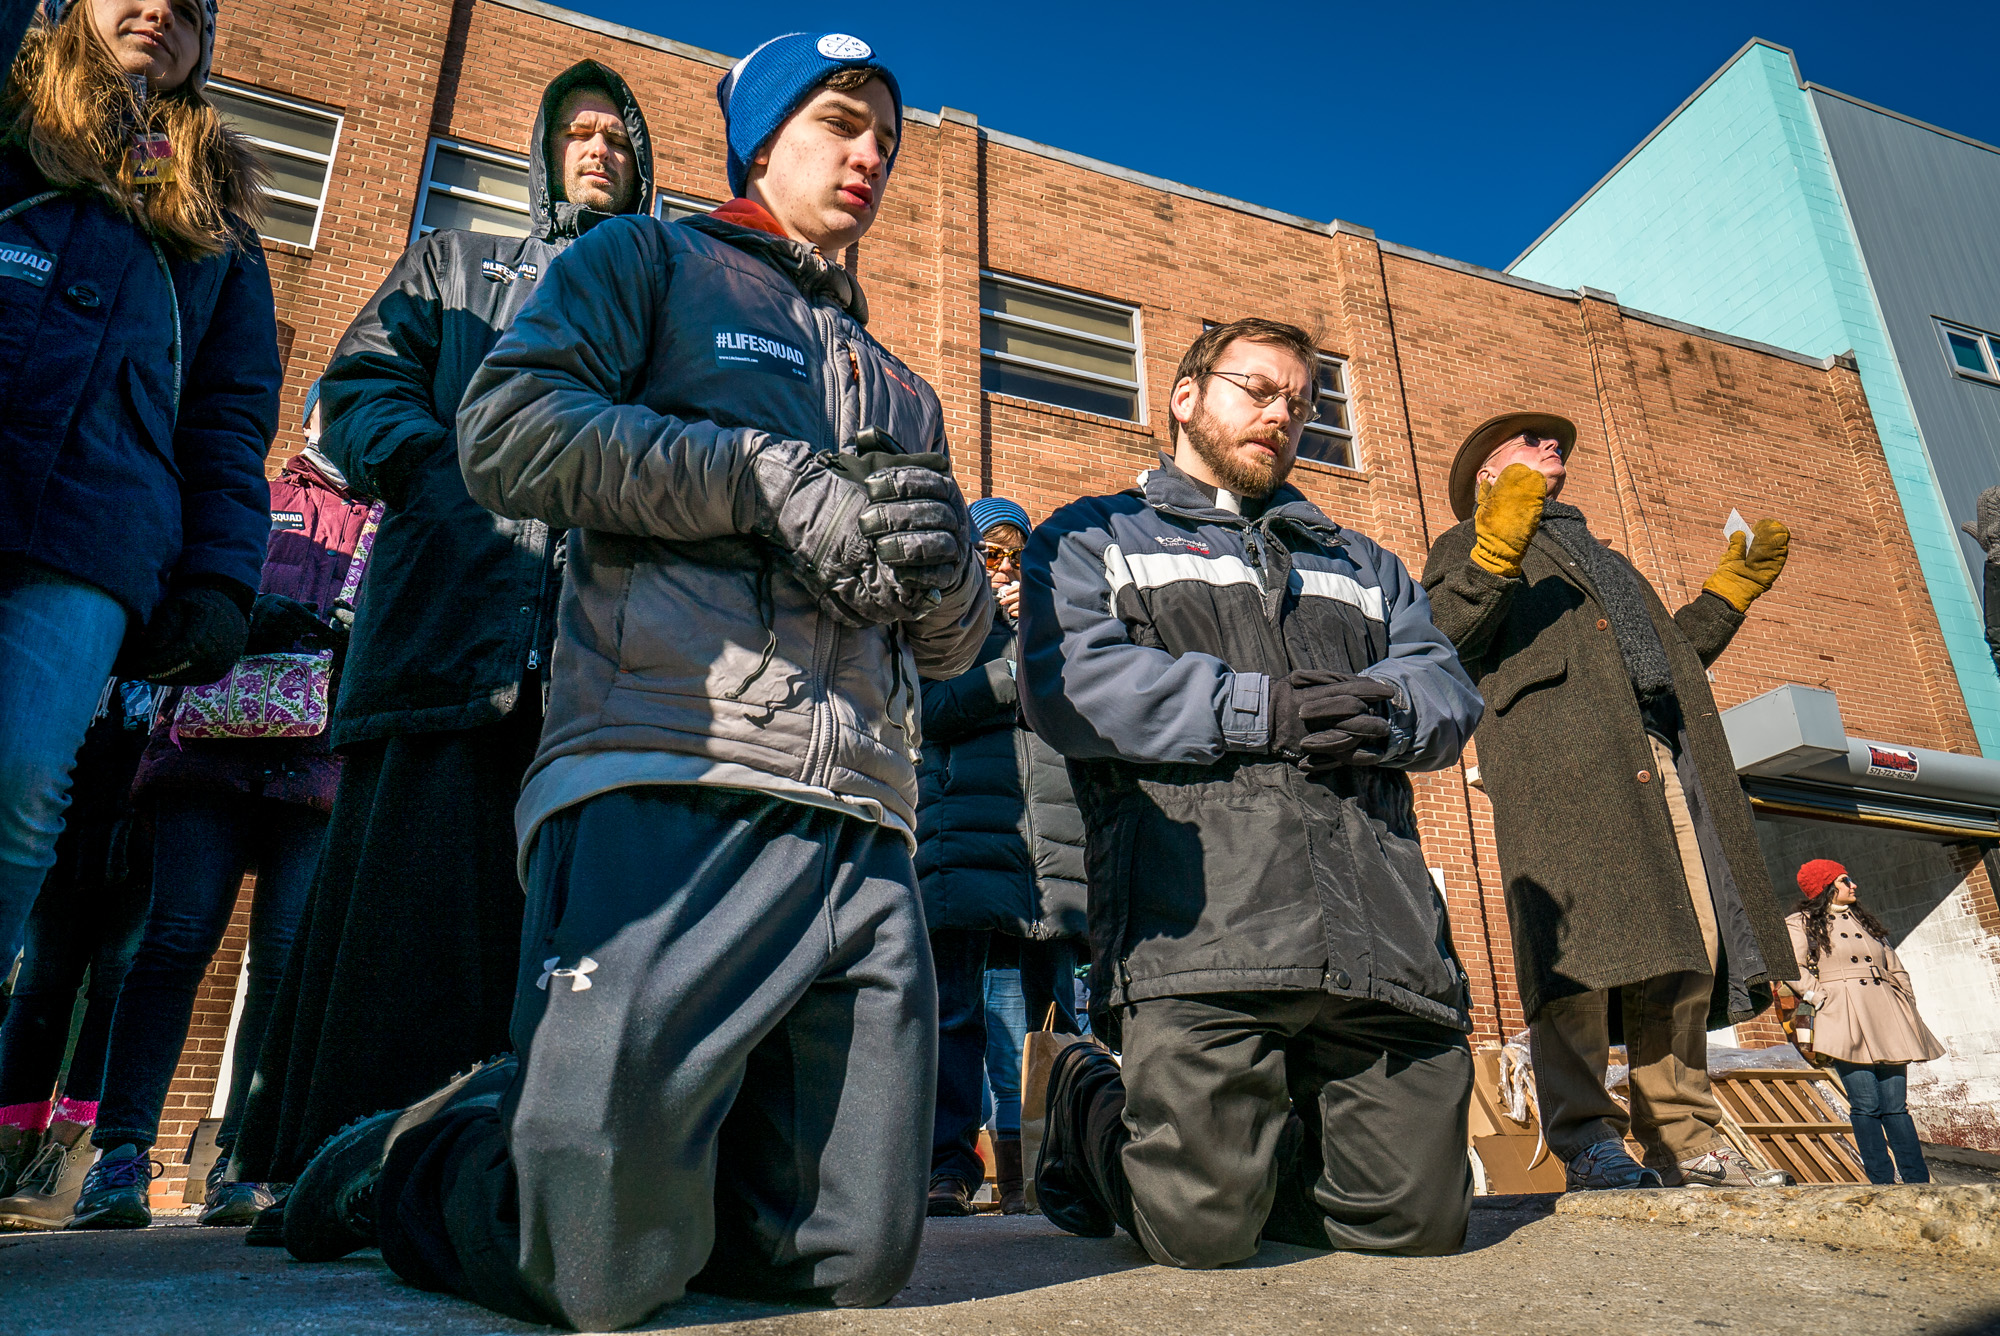 From left, Father James Adams, Jame Pierucci, Father Tom McNally and Mike Caldwell from Kalamazoo, Mich., prayed outside of Planned Parenthood Jan. 18 in Washington, D.C. The group was participating in a protest outside the clinic held by Priests for Life.